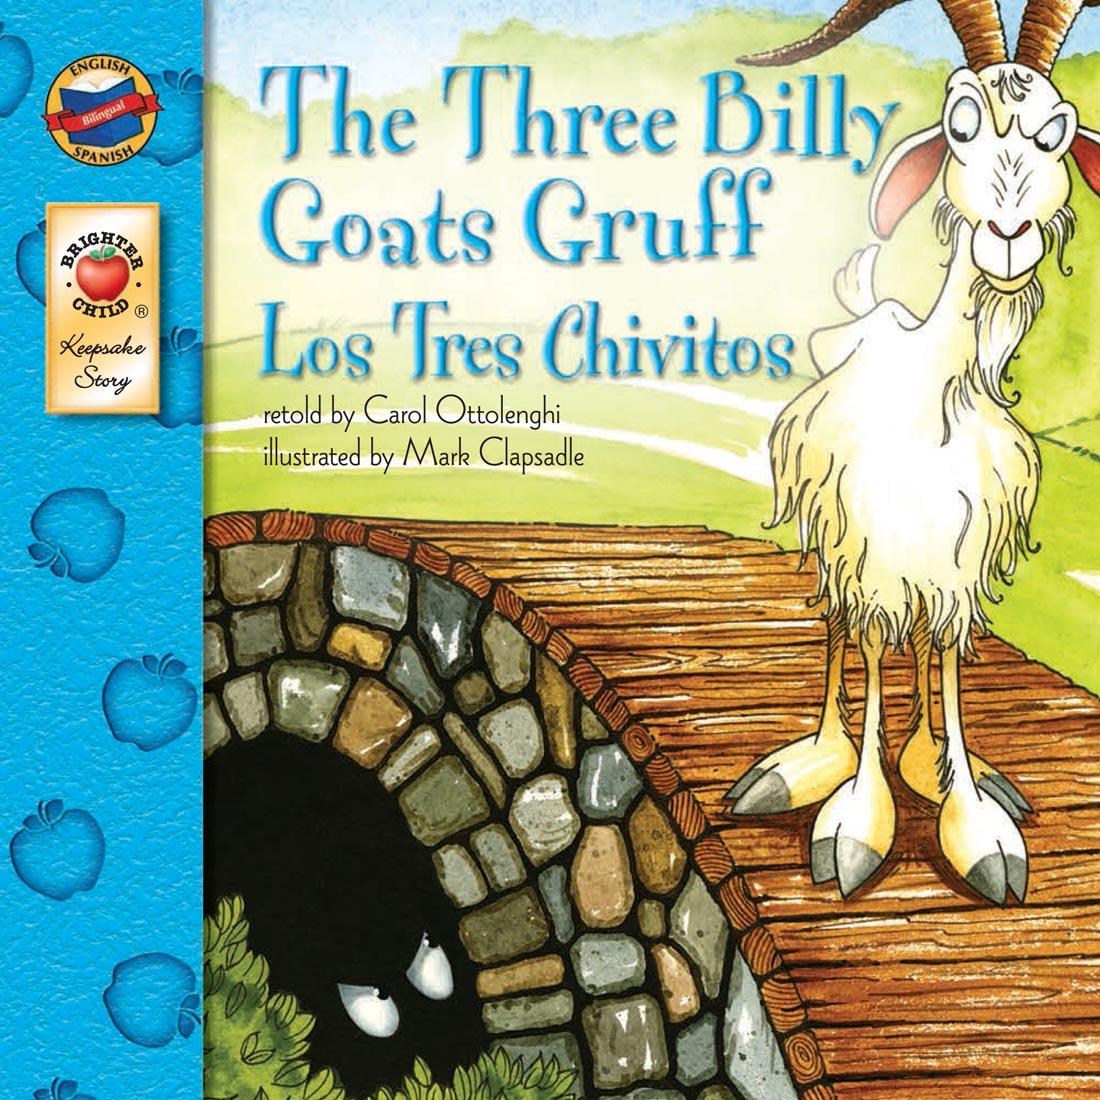 The Three Billy Goats Gruff Los Tres Chivitos